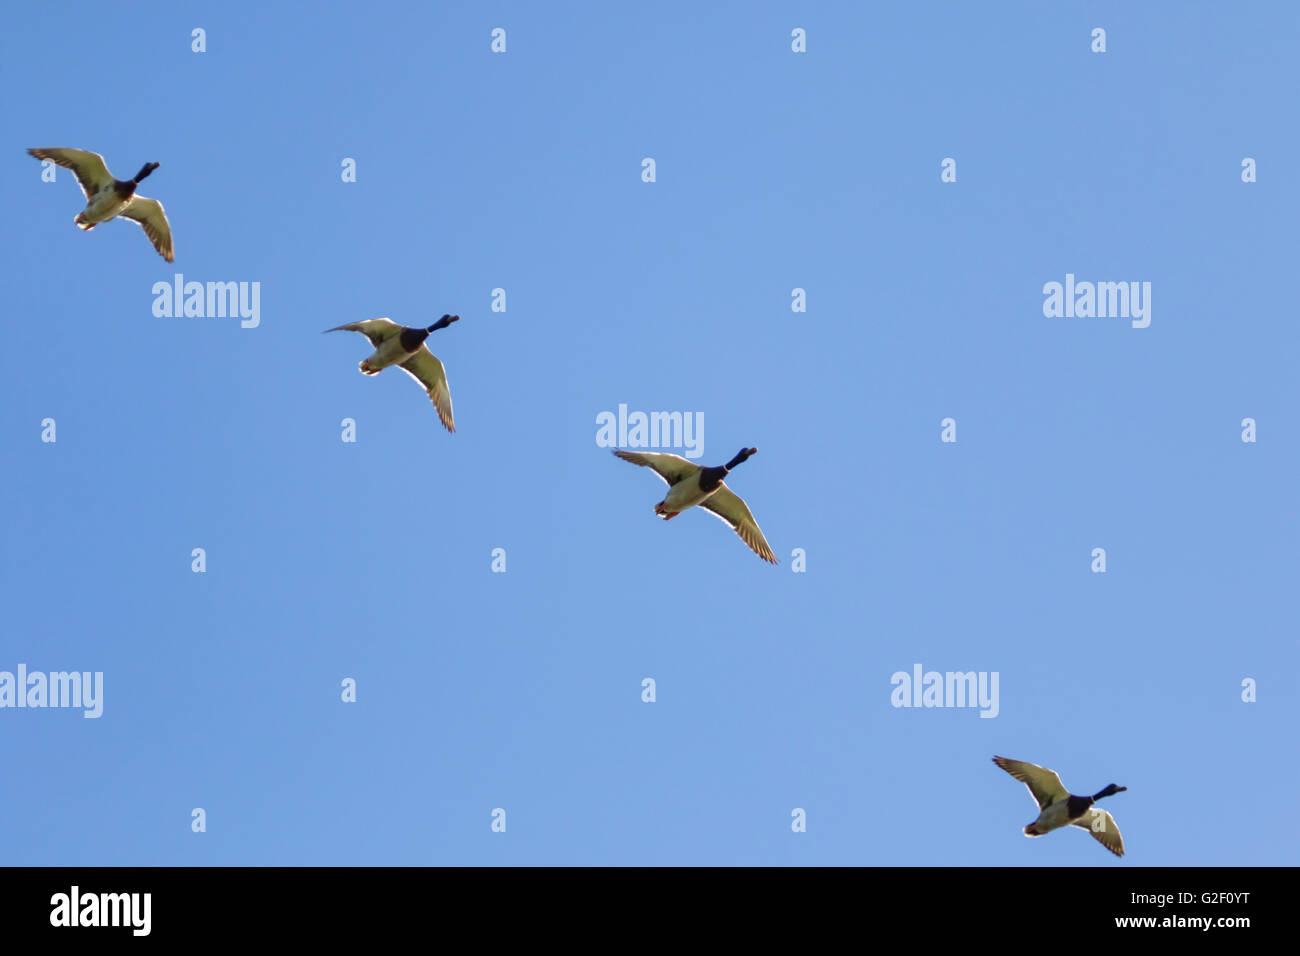 Les canards colverts (Anas platyrhynchos) volant en formation. Banque D'Images